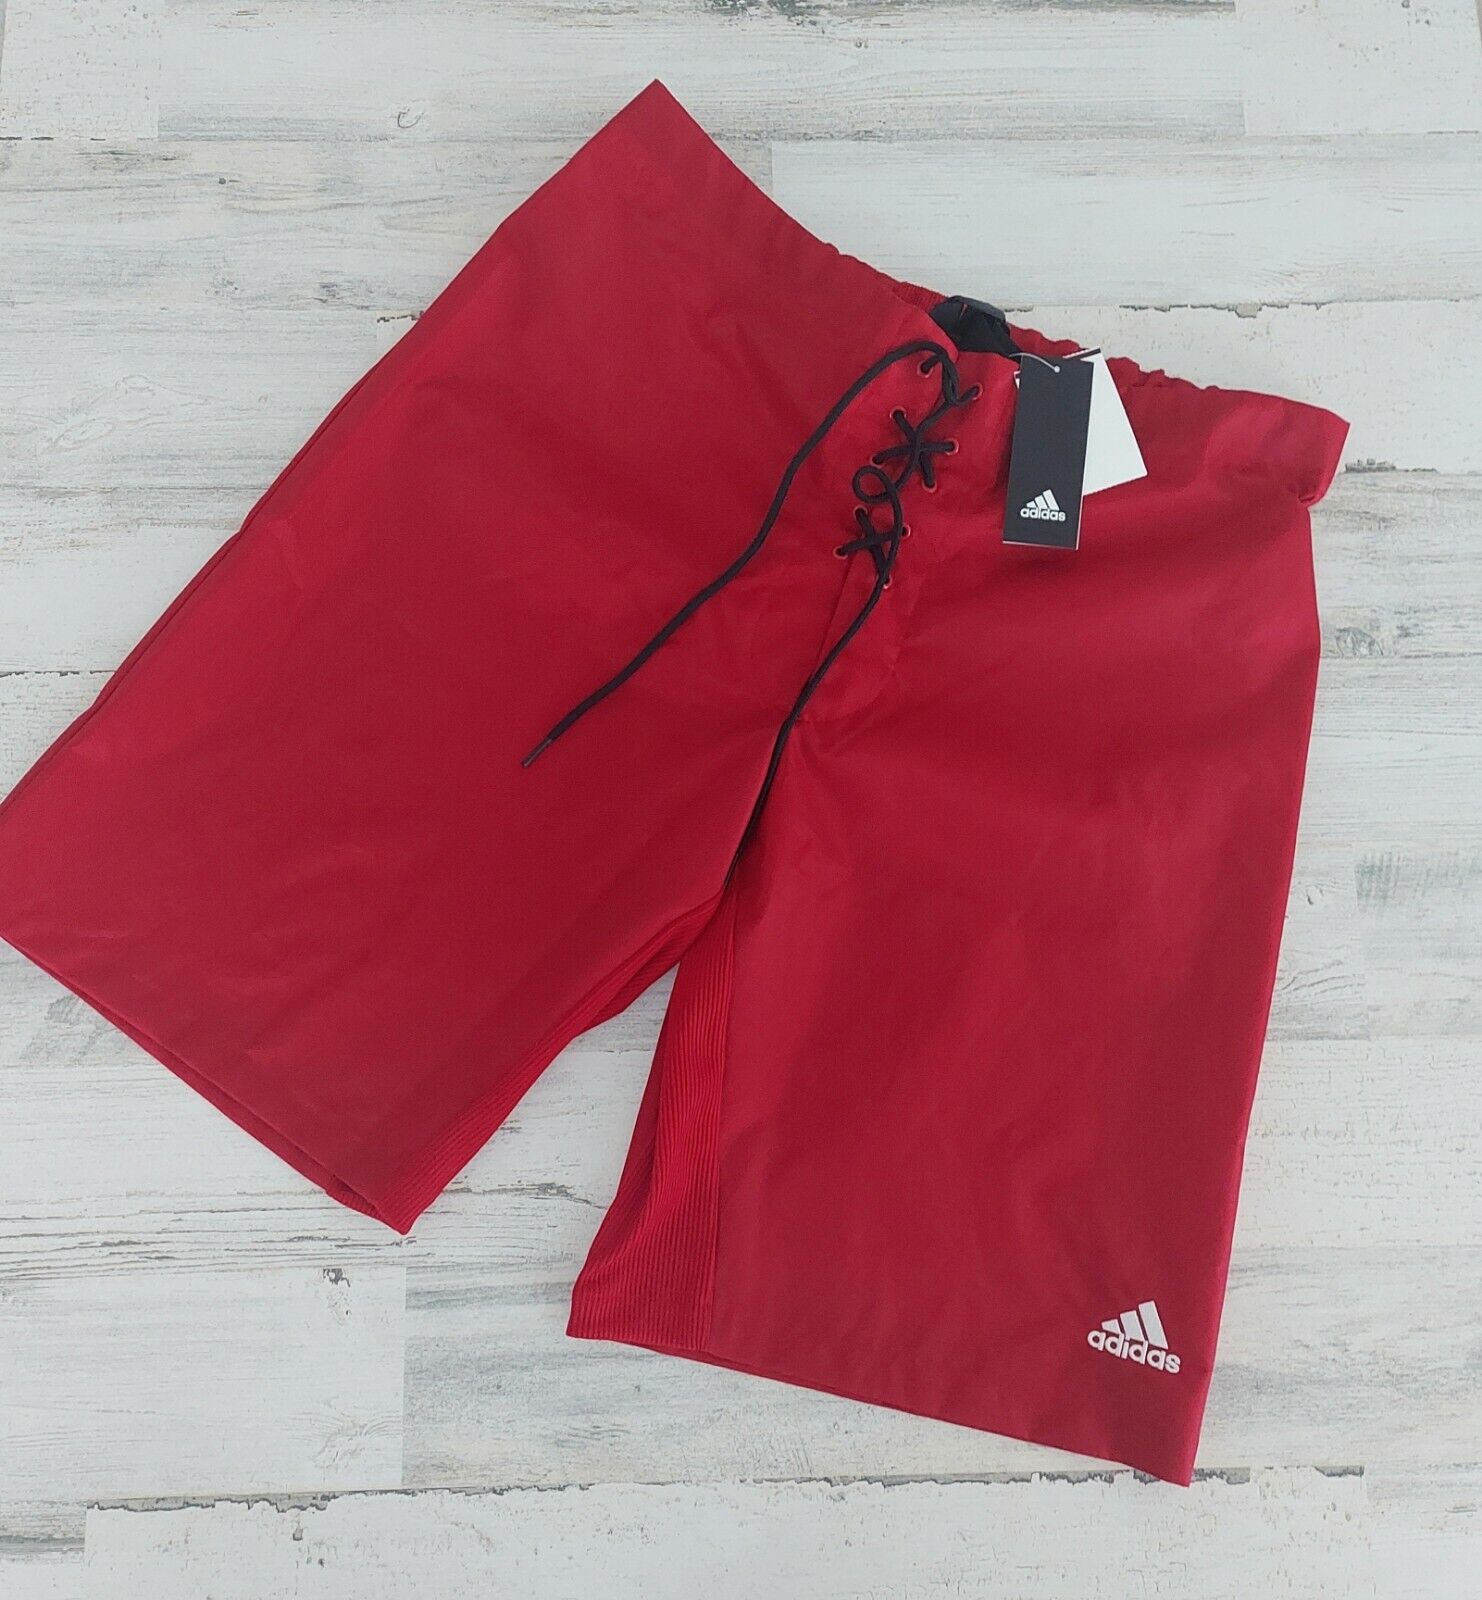 Adidas Men's Aditeam Hockey Size M Shell A Pant Power Red Msrp $45